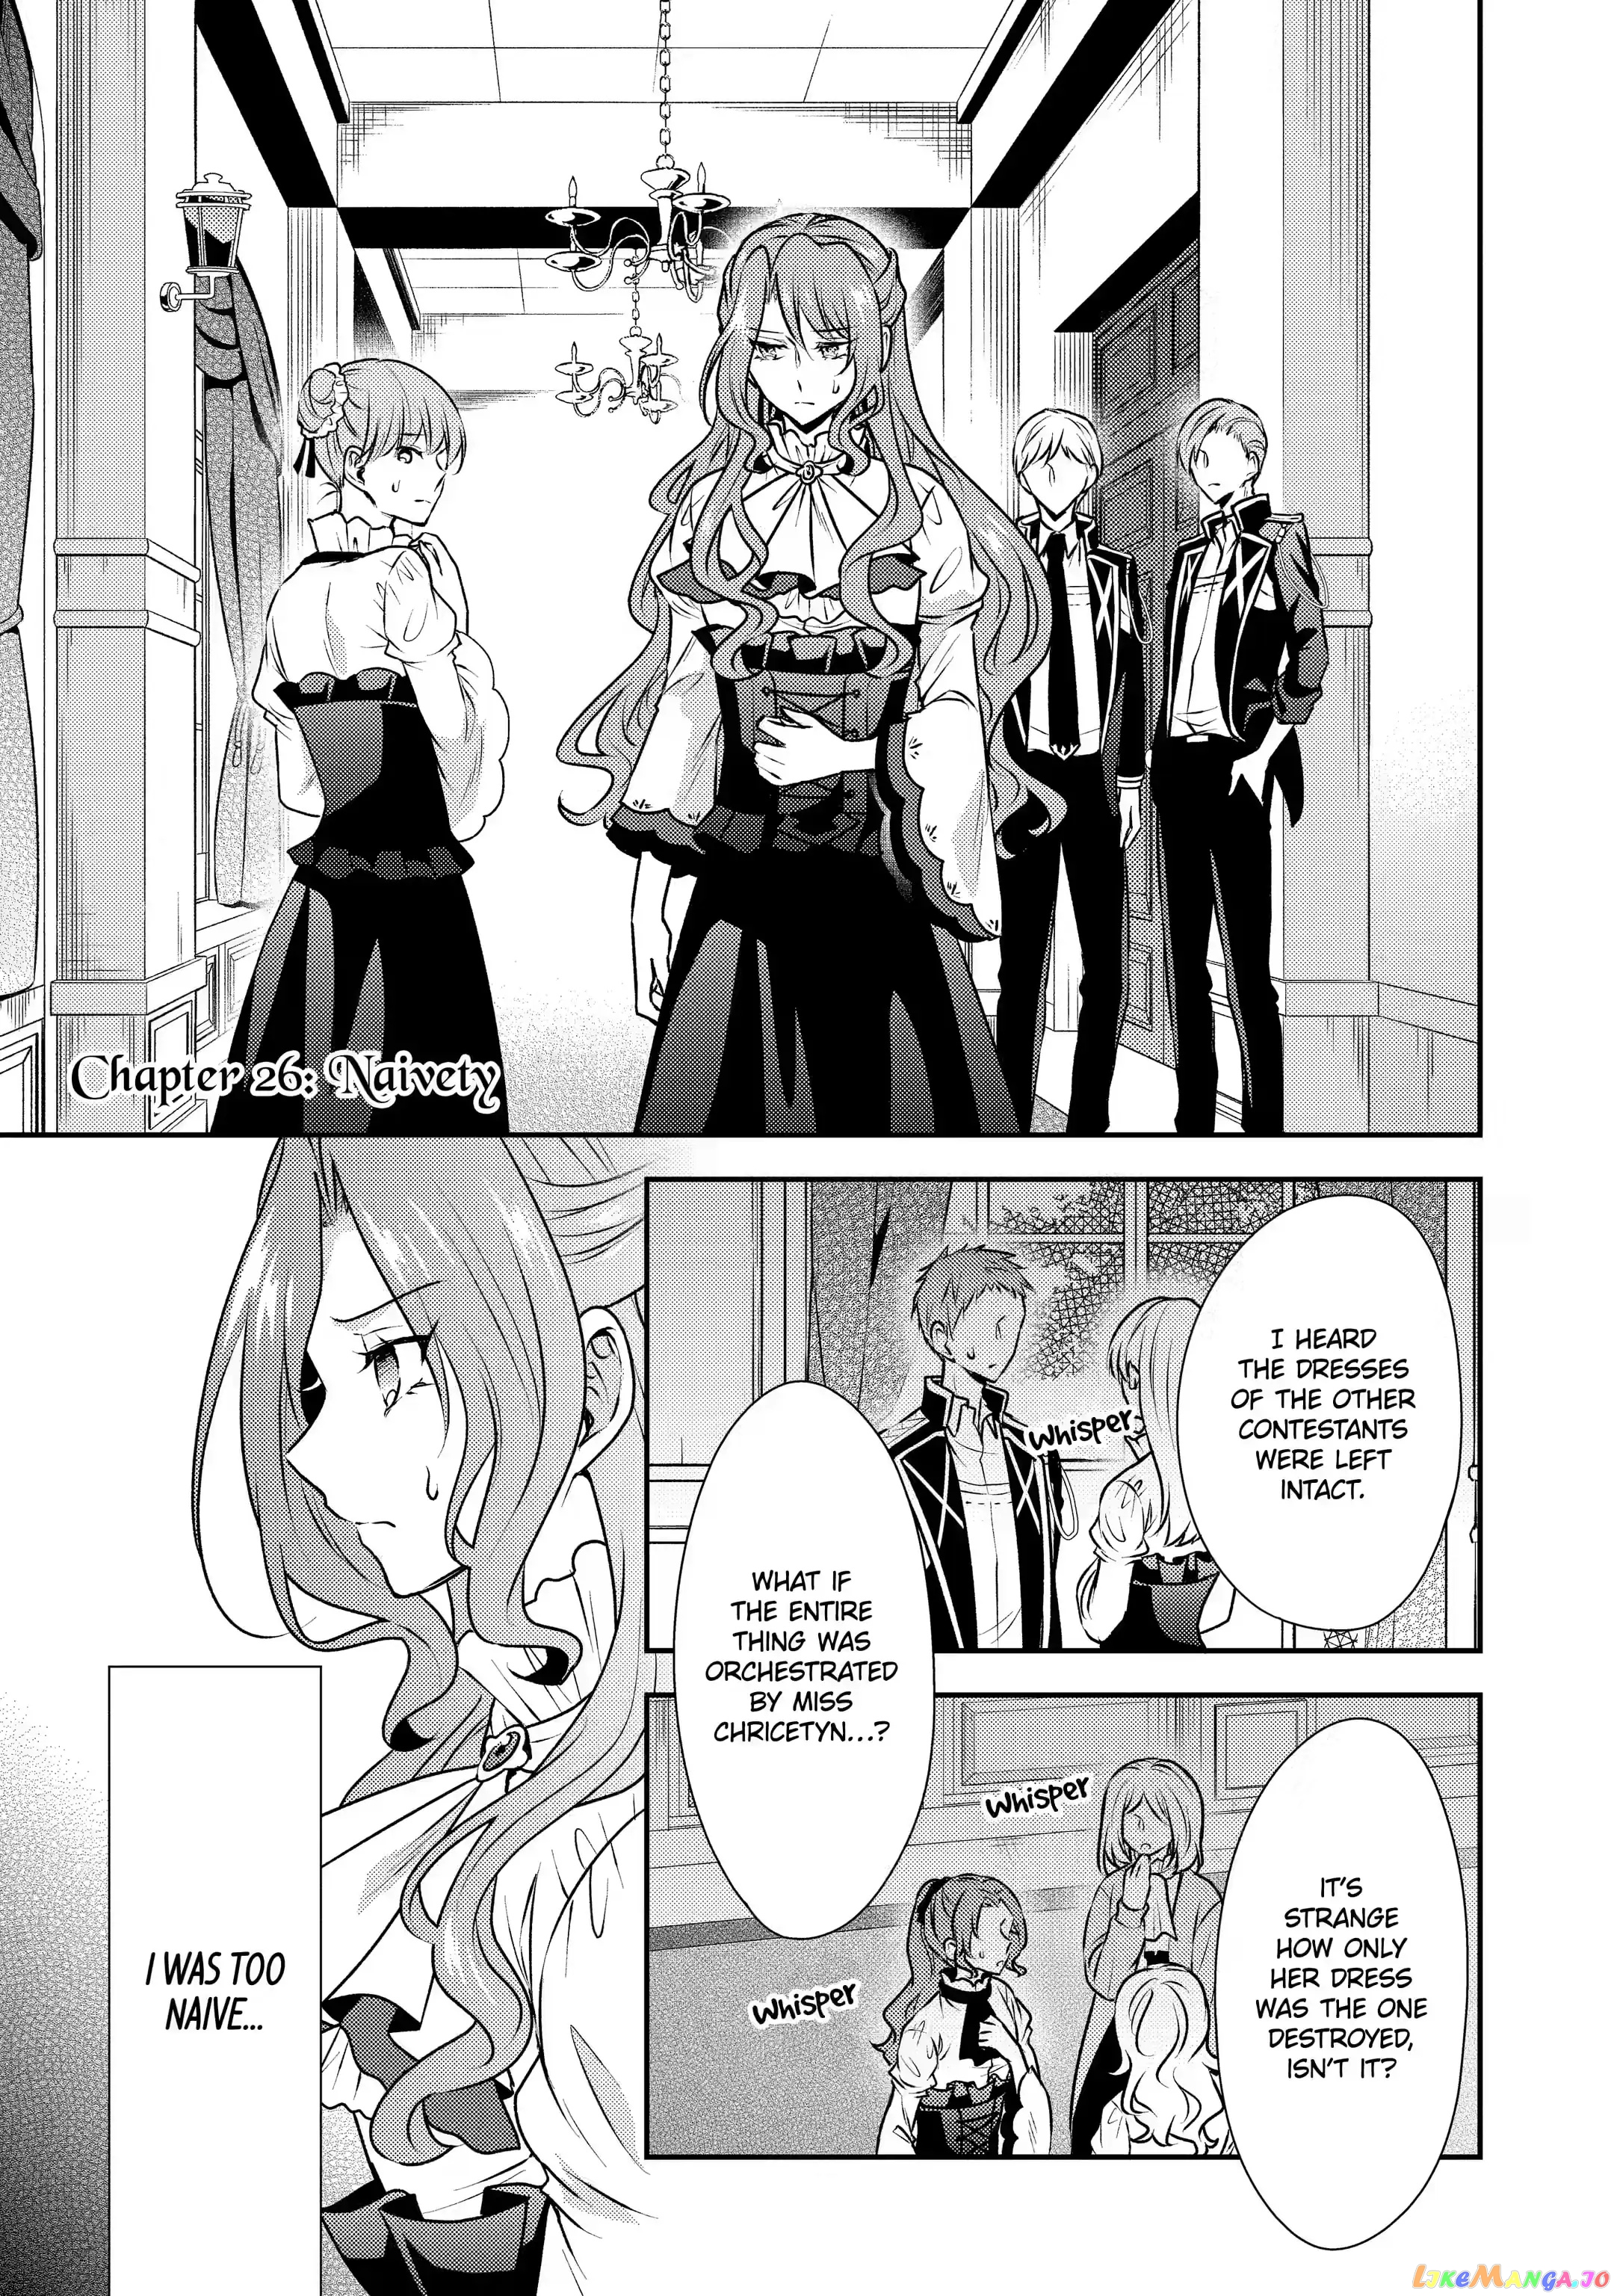 Auto-Mode Expired In The 6Th Round Of The Otome Game chapter 26.1 - page 1